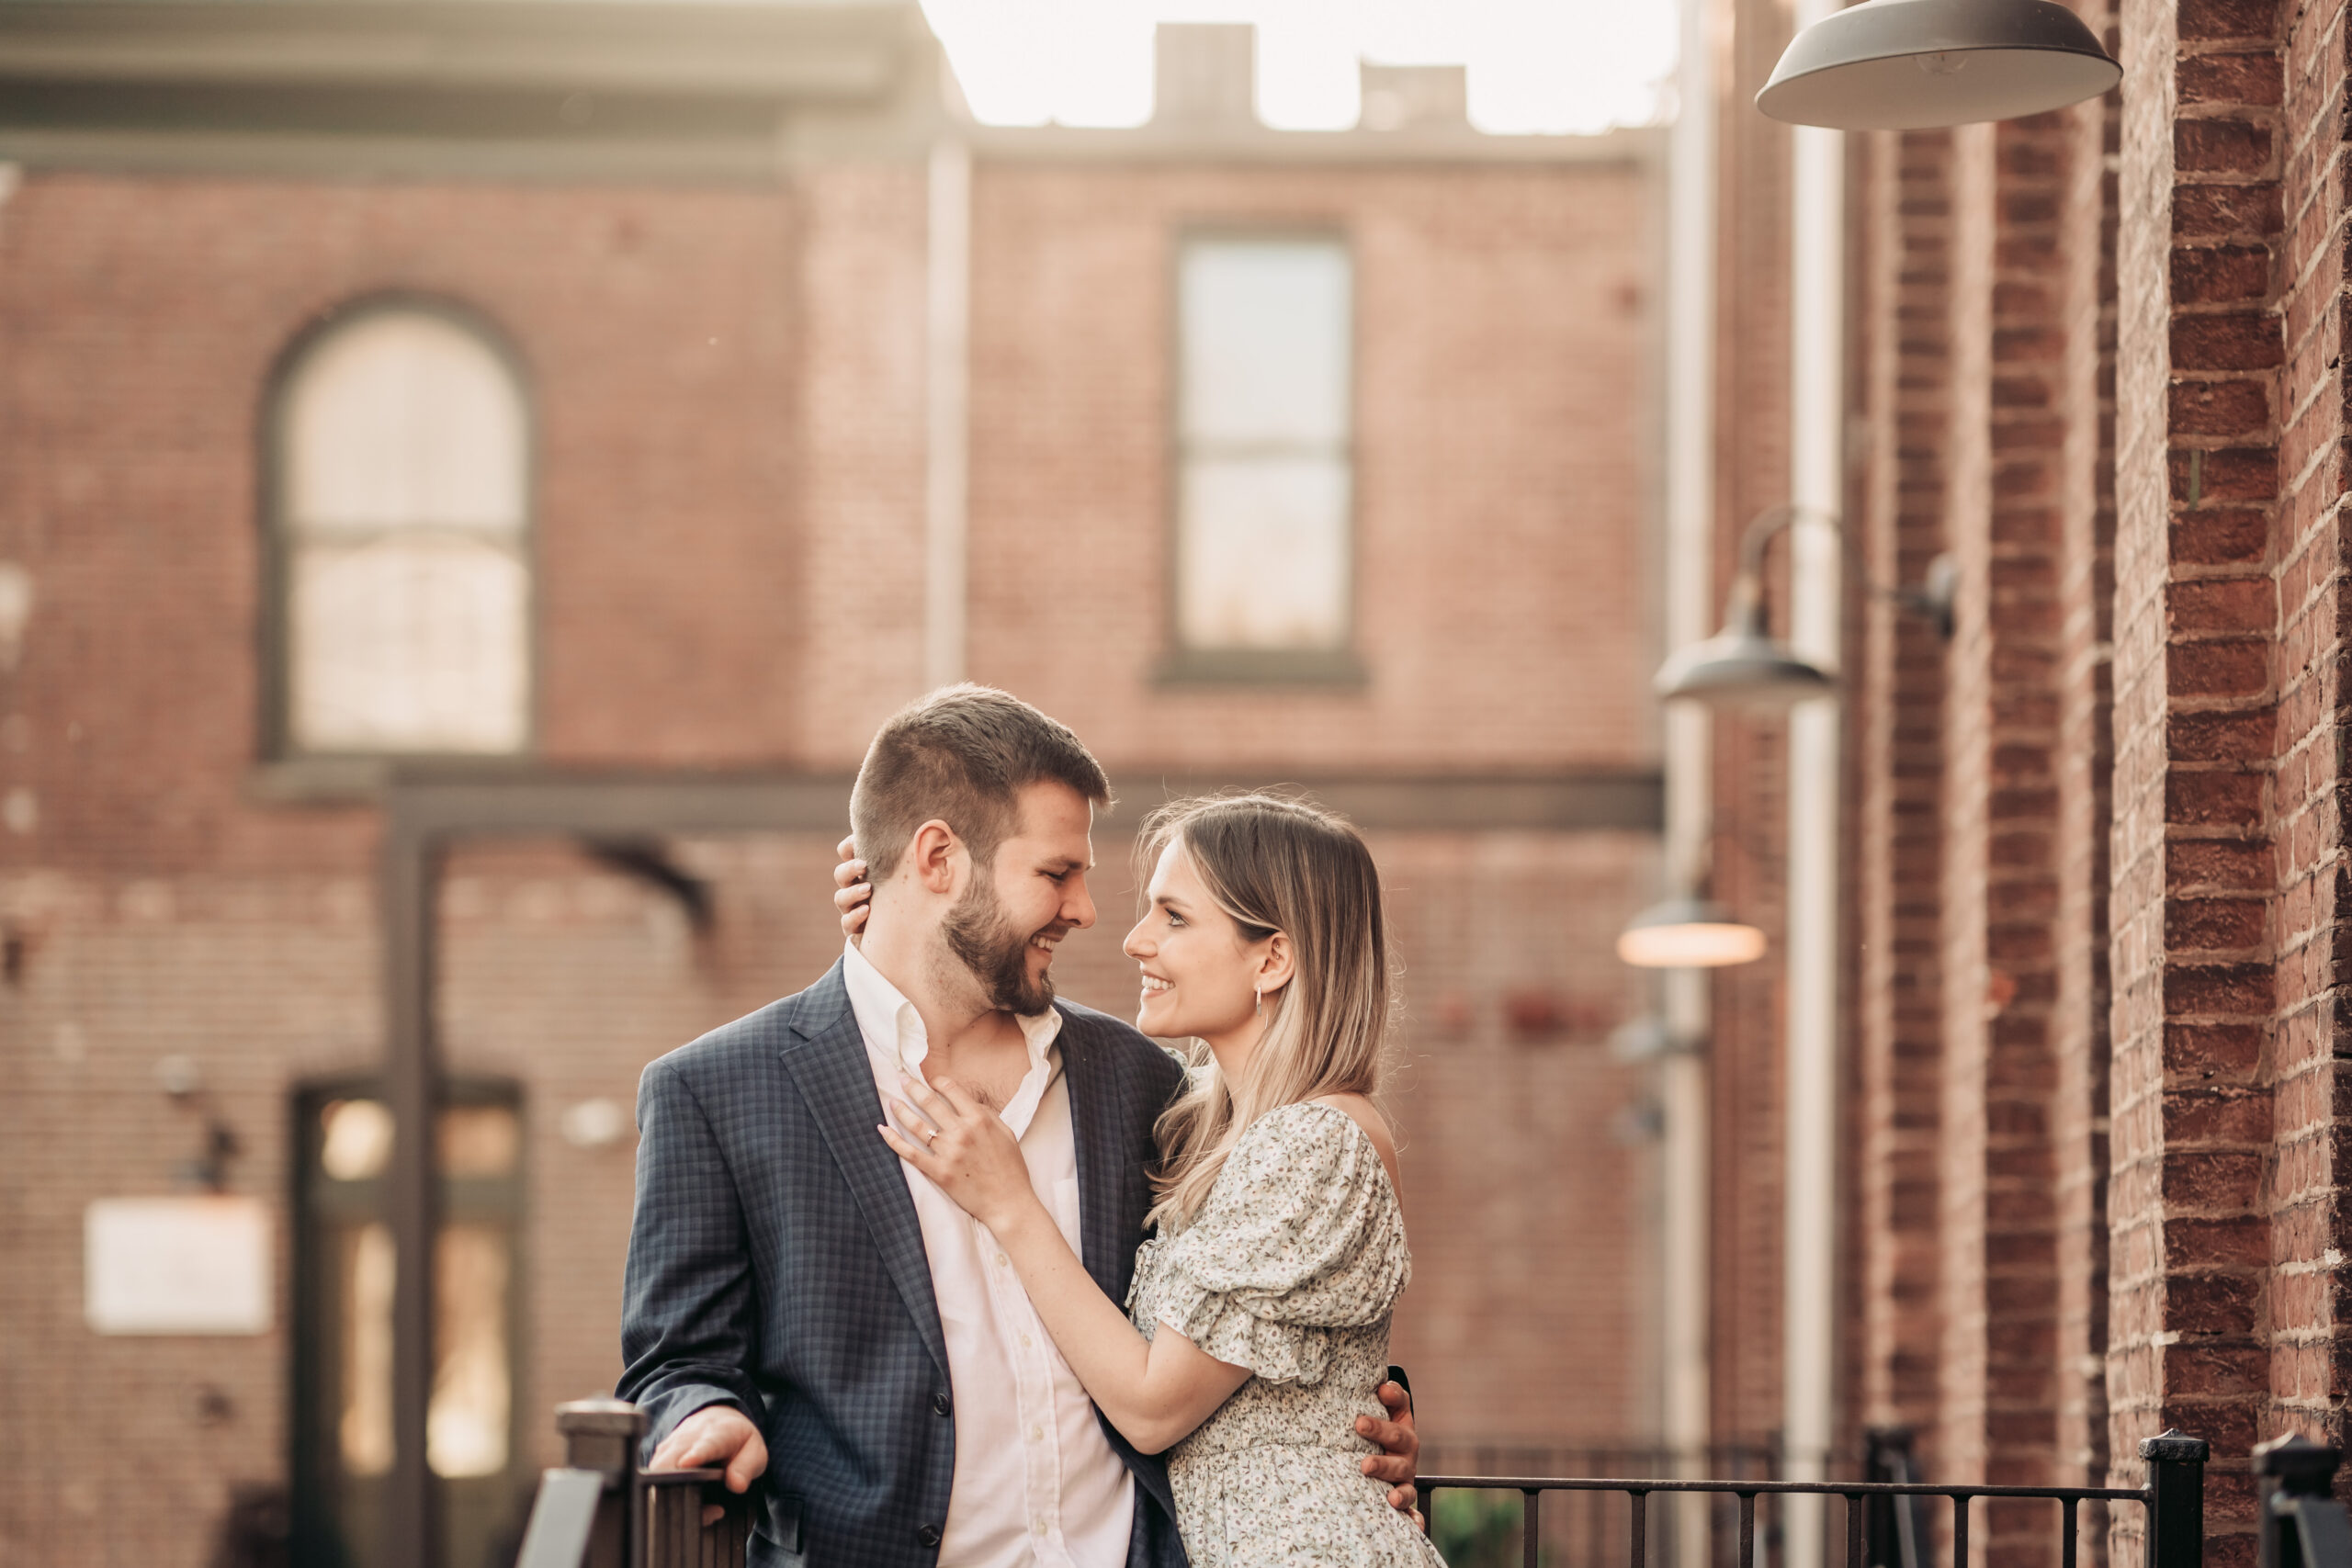 Easton Proposal, Easton Pennsylvania Proposal Photographer, PA Proposal Photographer, NJ Proposal Photographer, couple smiling and staring into each others eyes while woman holds man while showing her engagement ring